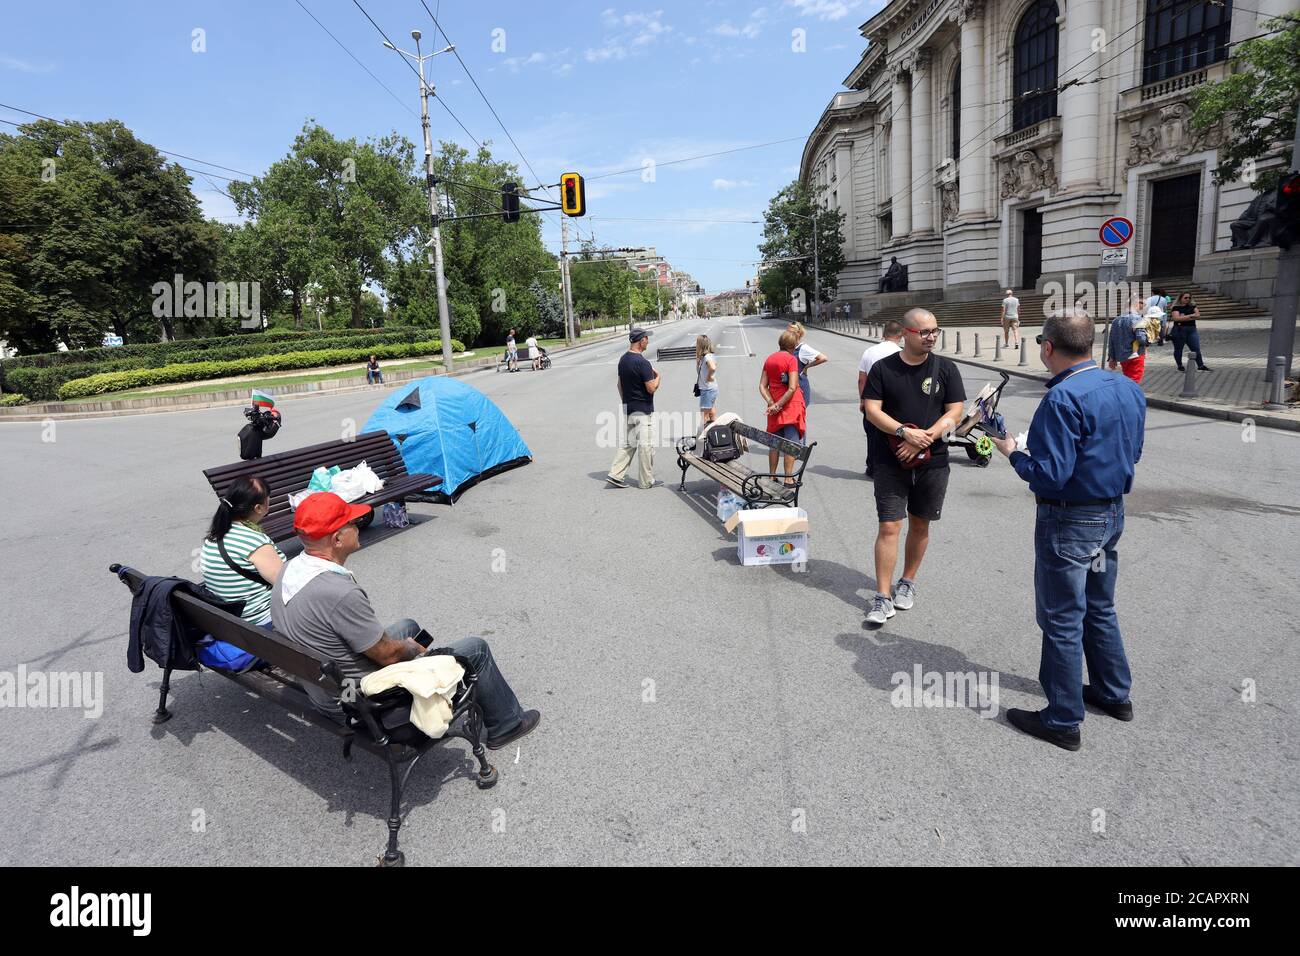 Protest against the government and the chief prosecutor set up barricades on Sofia University 'St. Kliment Ohridski' in Sofia, Bulgaria on 08/08/2020. Stock Photo